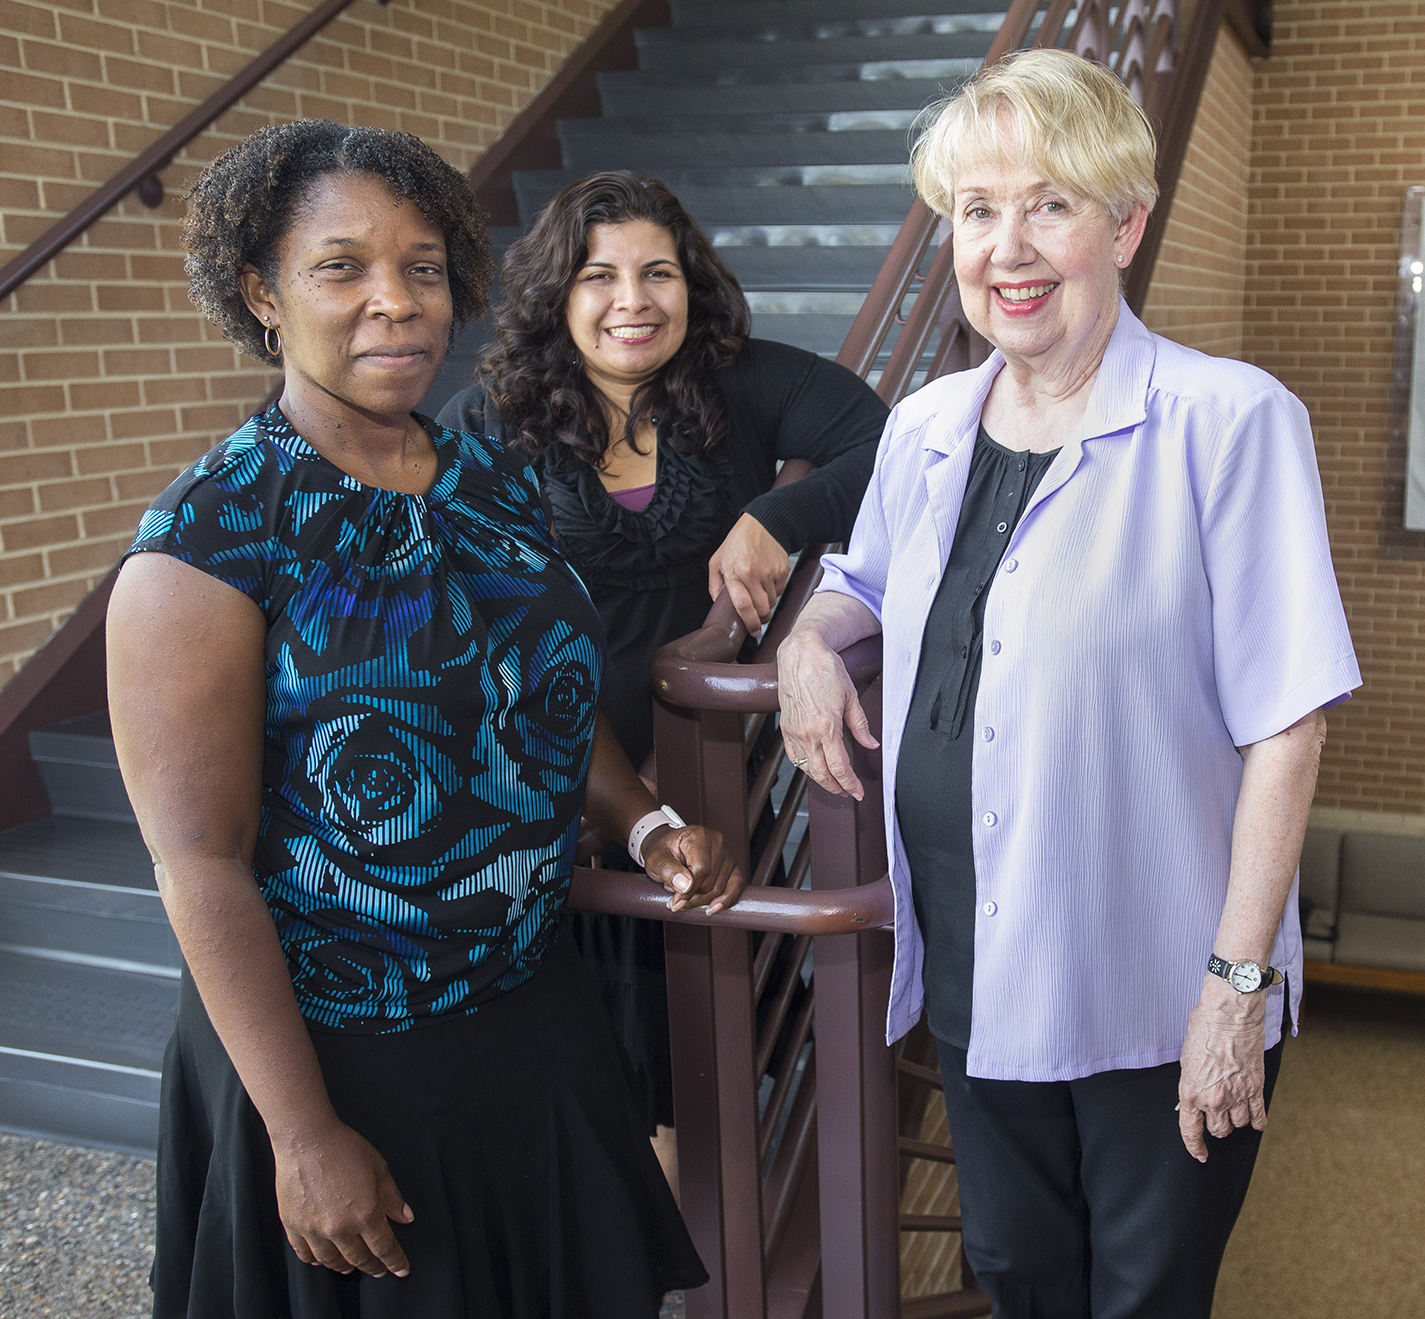 Tamika Steward, Monica Sosa and Violet O’Valle discuss how things have changed for women over the years at TCC.